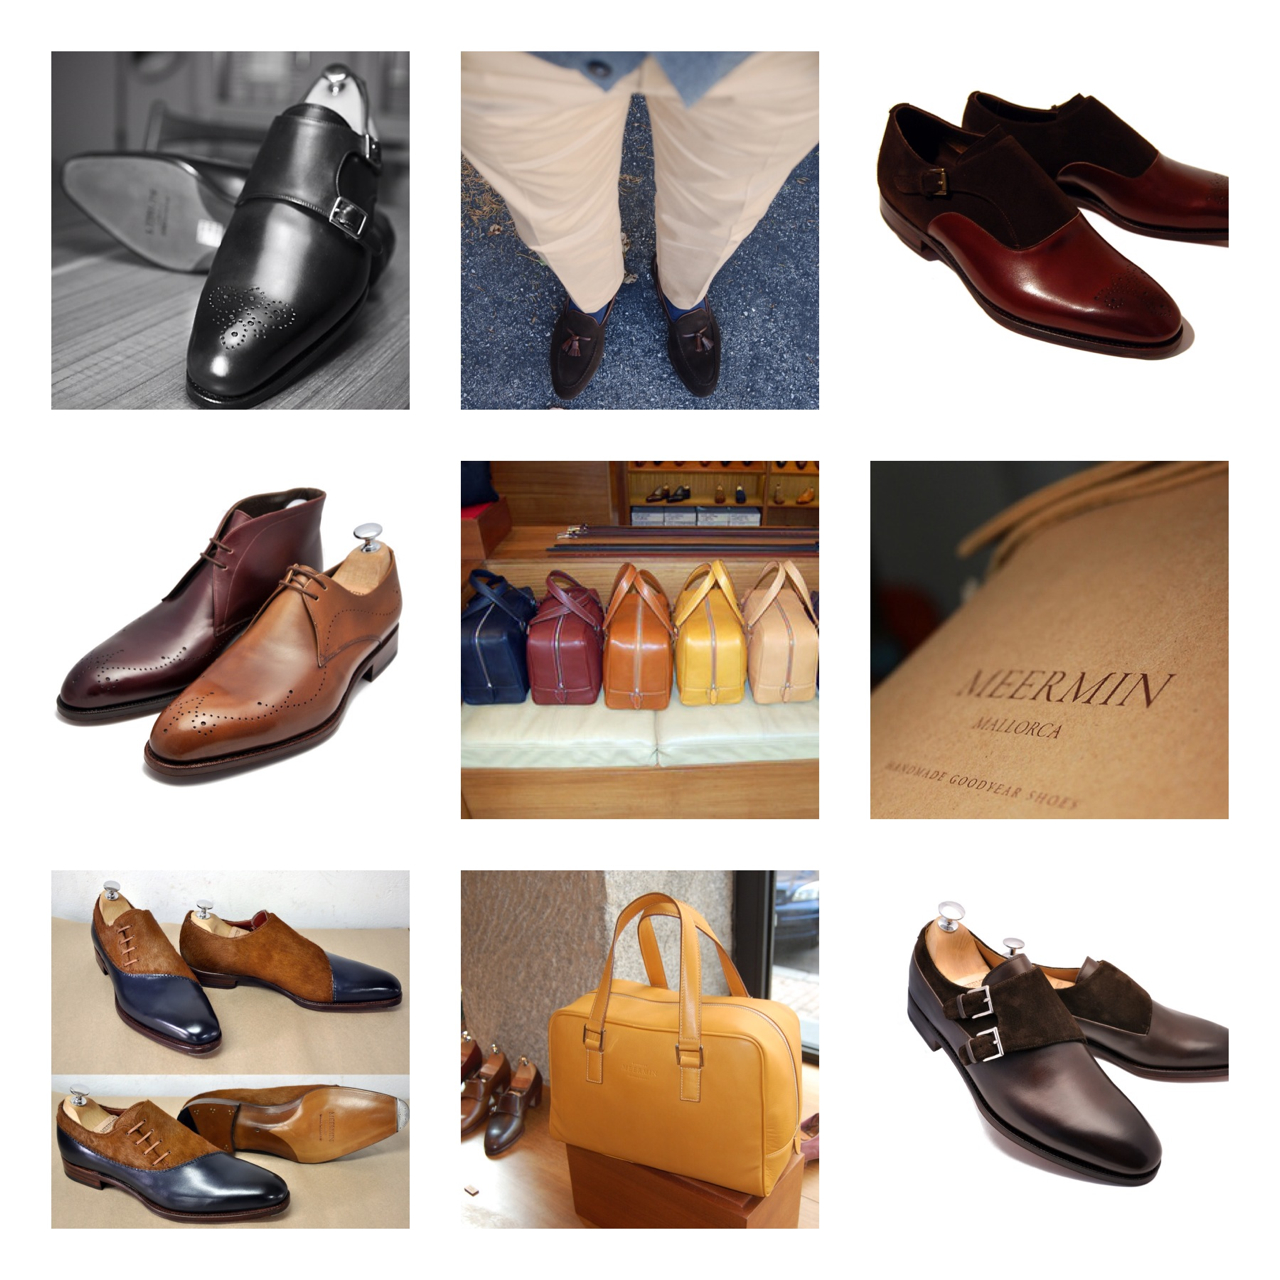 The Shoe AristoCat: Meermin - Shoes from Spain for every pocket